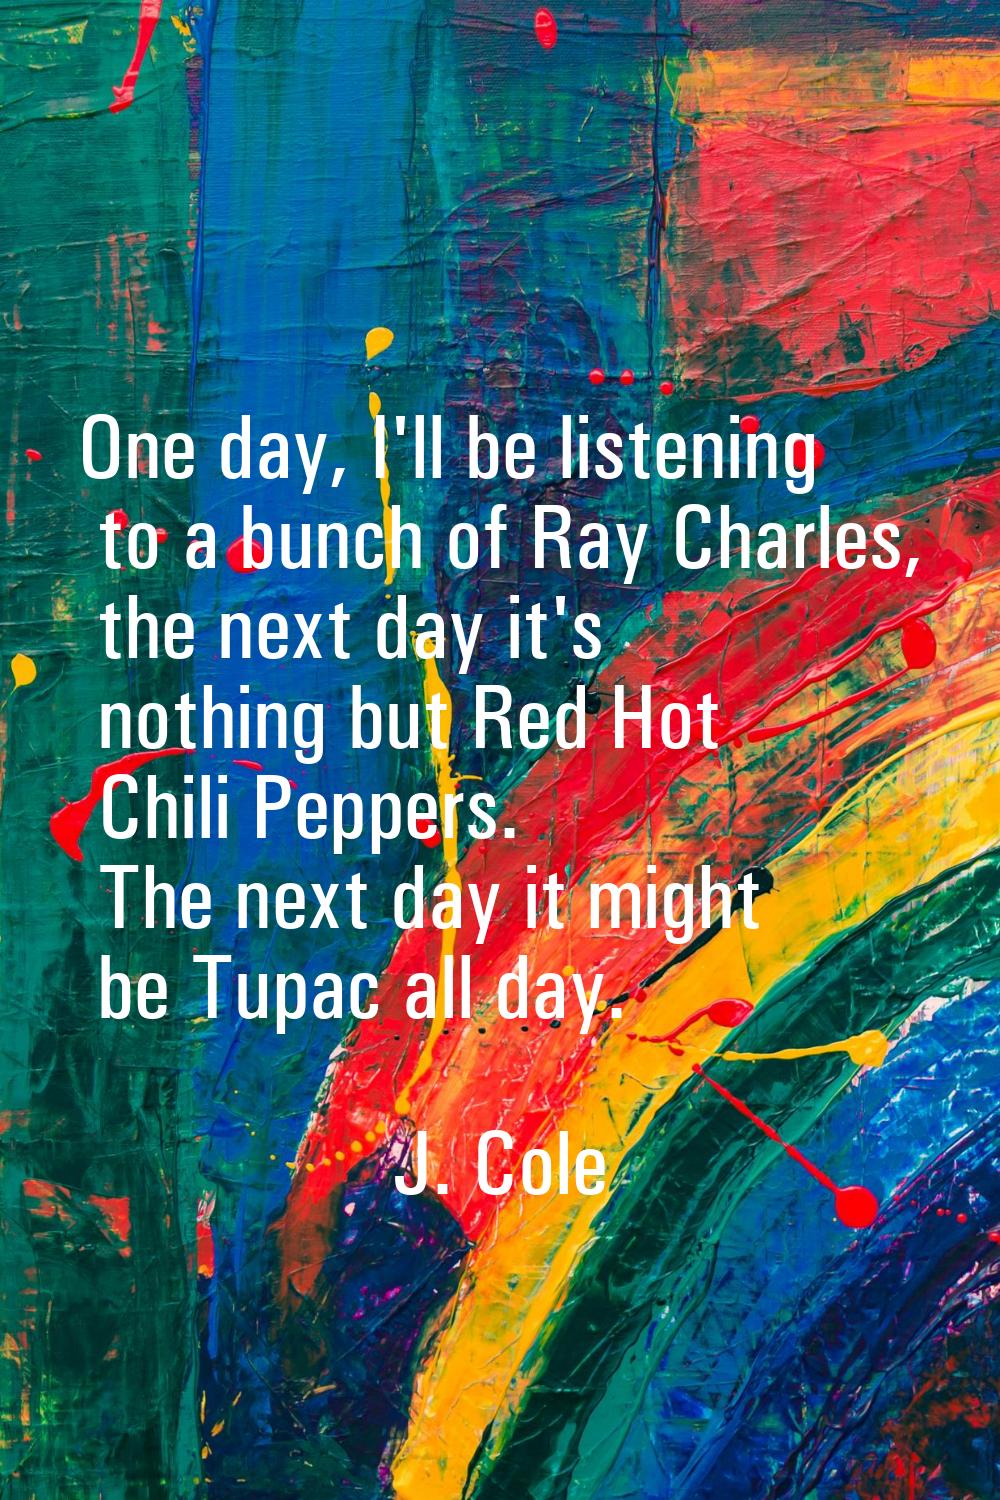 One day, I'll be listening to a bunch of Ray Charles, the next day it's nothing but Red Hot Chili P